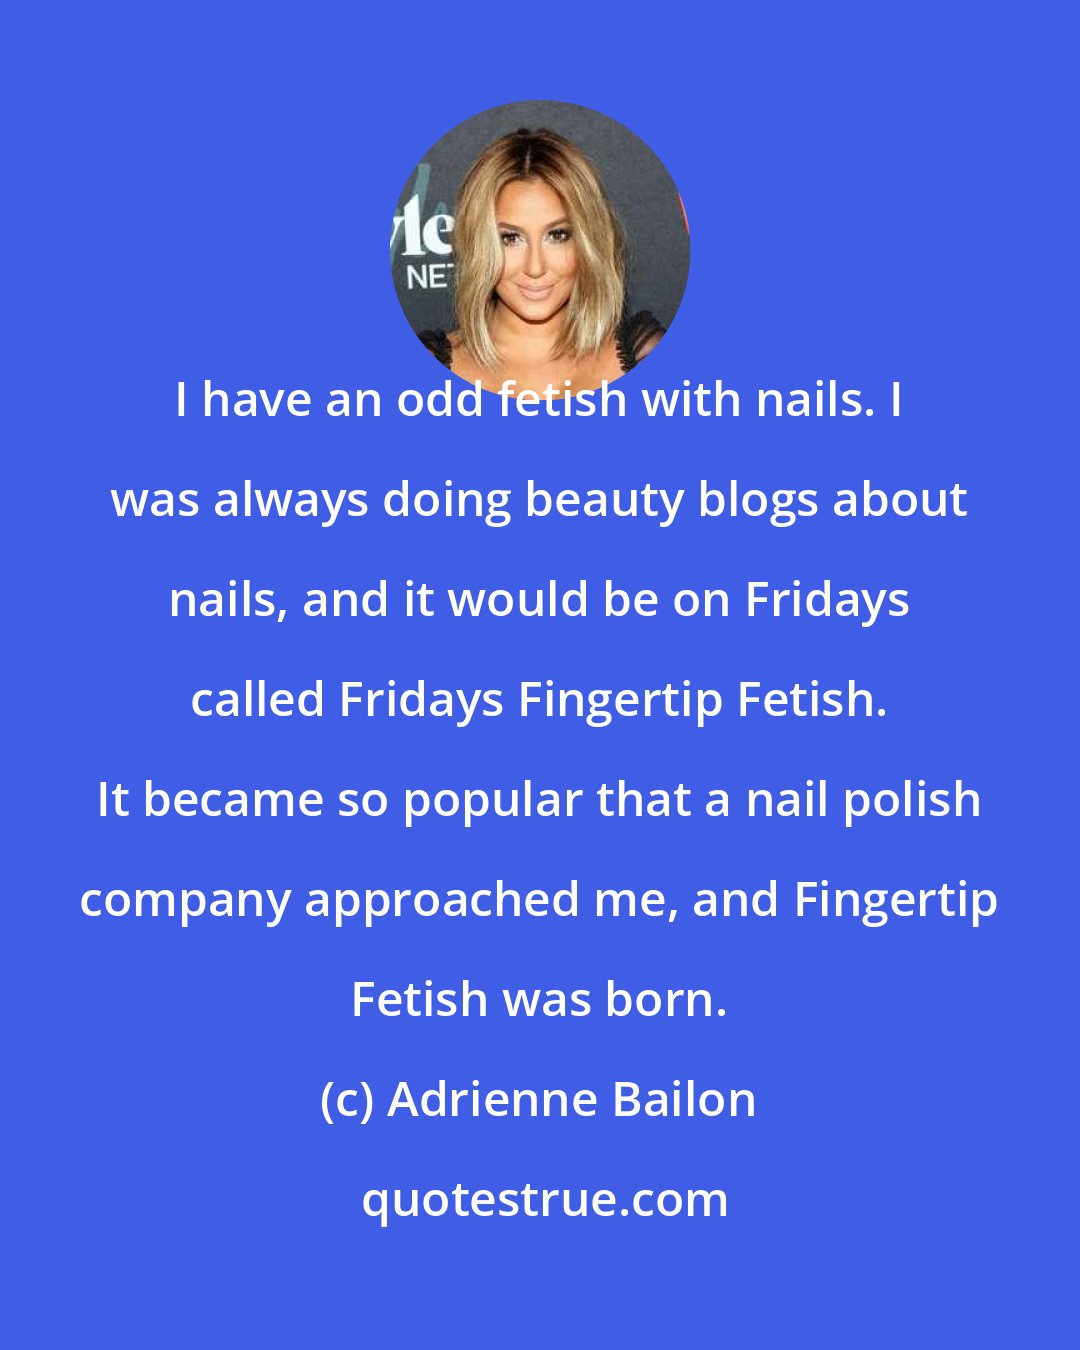 Adrienne Bailon: I have an odd fetish with nails. I was always doing beauty blogs about nails, and it would be on Fridays called Fridays Fingertip Fetish. It became so popular that a nail polish company approached me, and Fingertip Fetish was born.